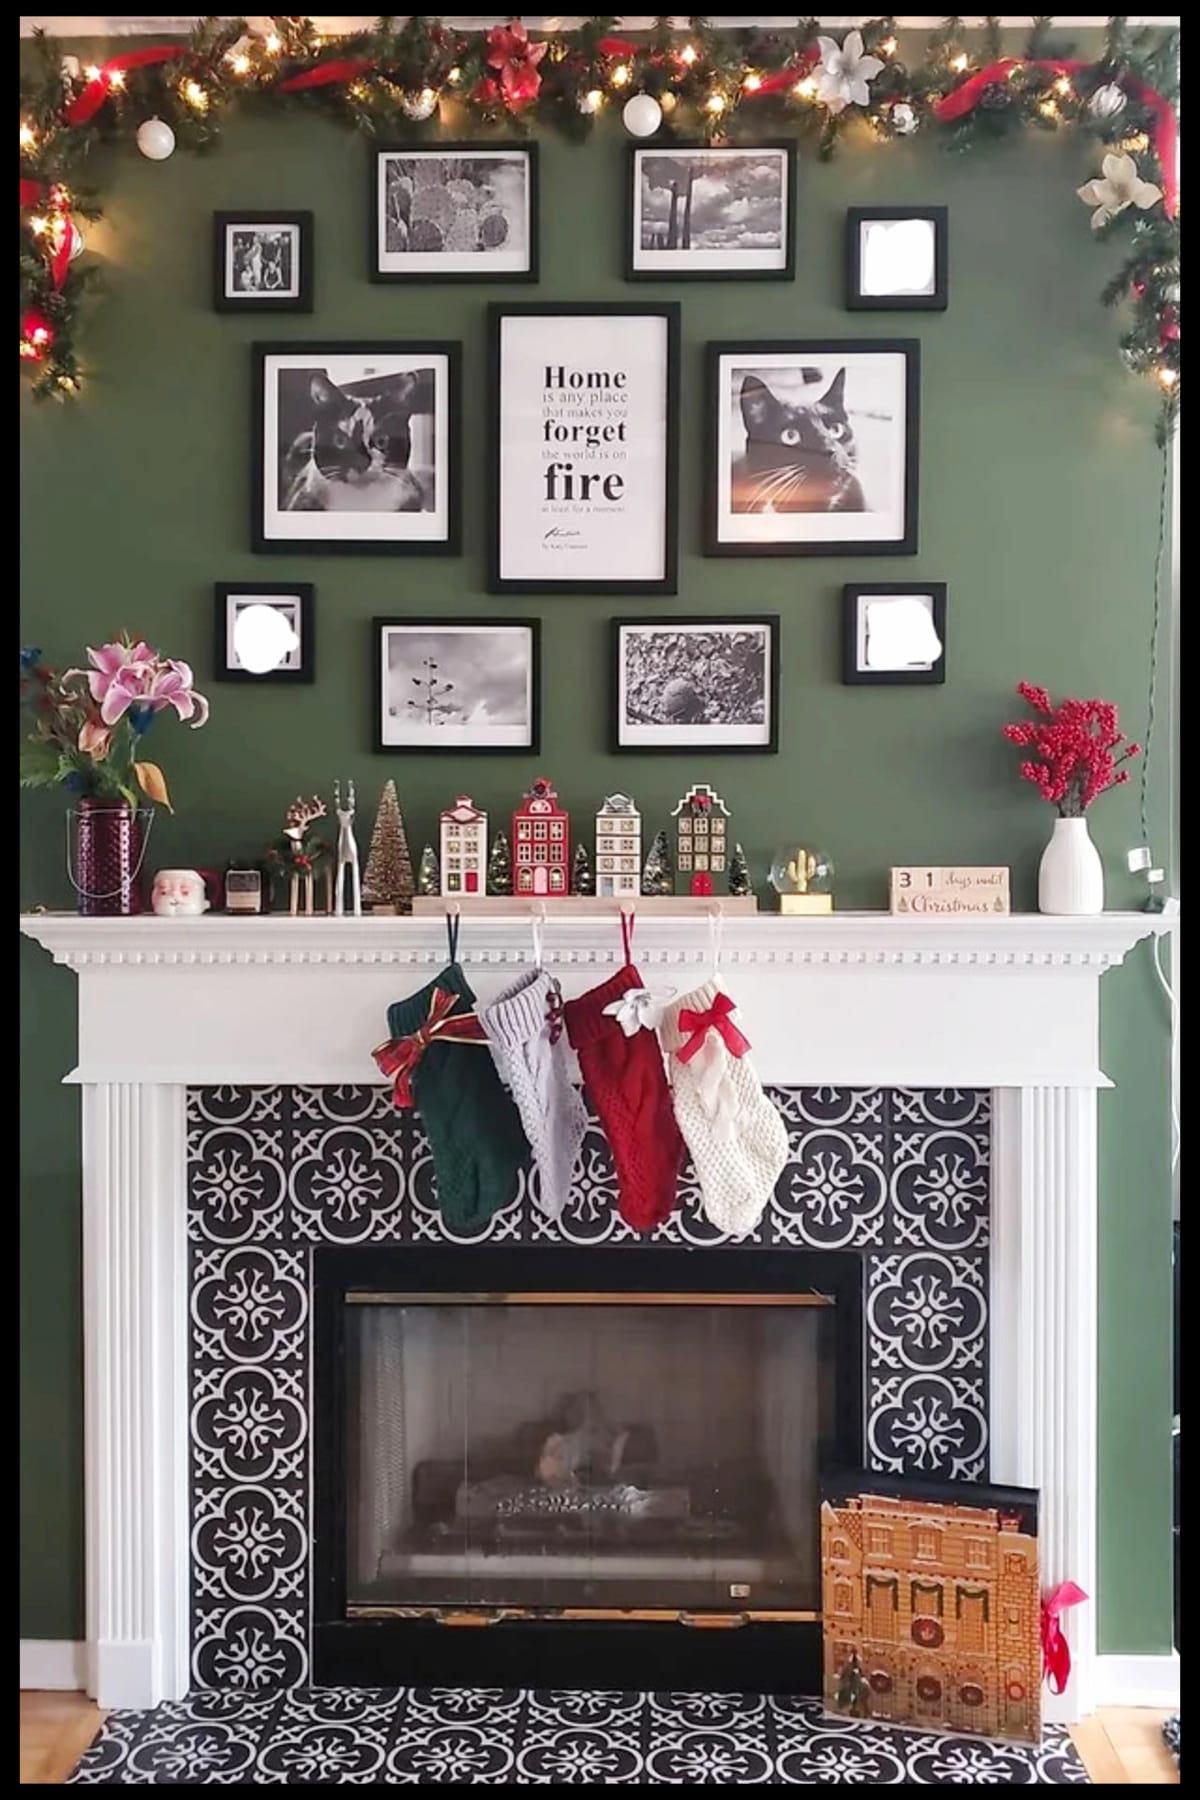 Photo wall over fireplace decorated for Christmas